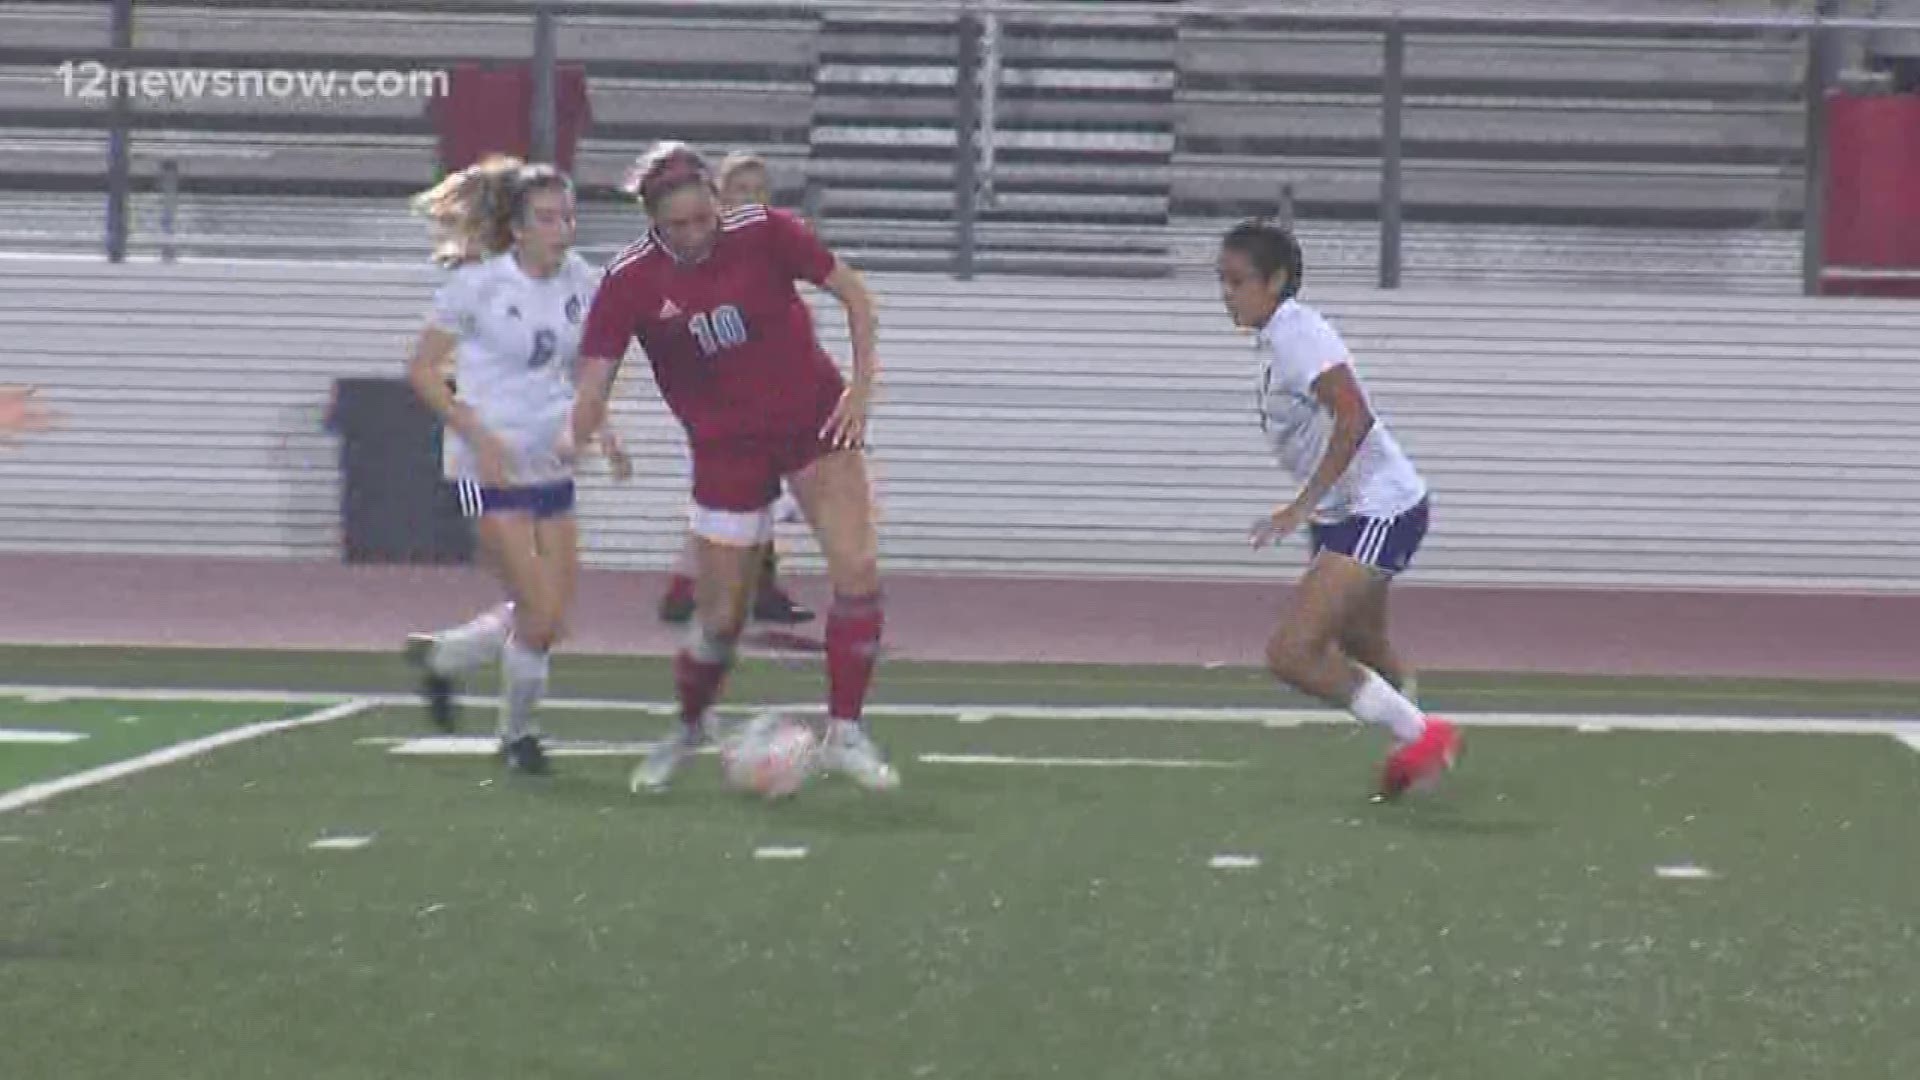 On Thursday it was supposed to be the road back to state for the Lumberton girls soccer team. Instead, due to the coronavirus pandemic, they're sitting at home.